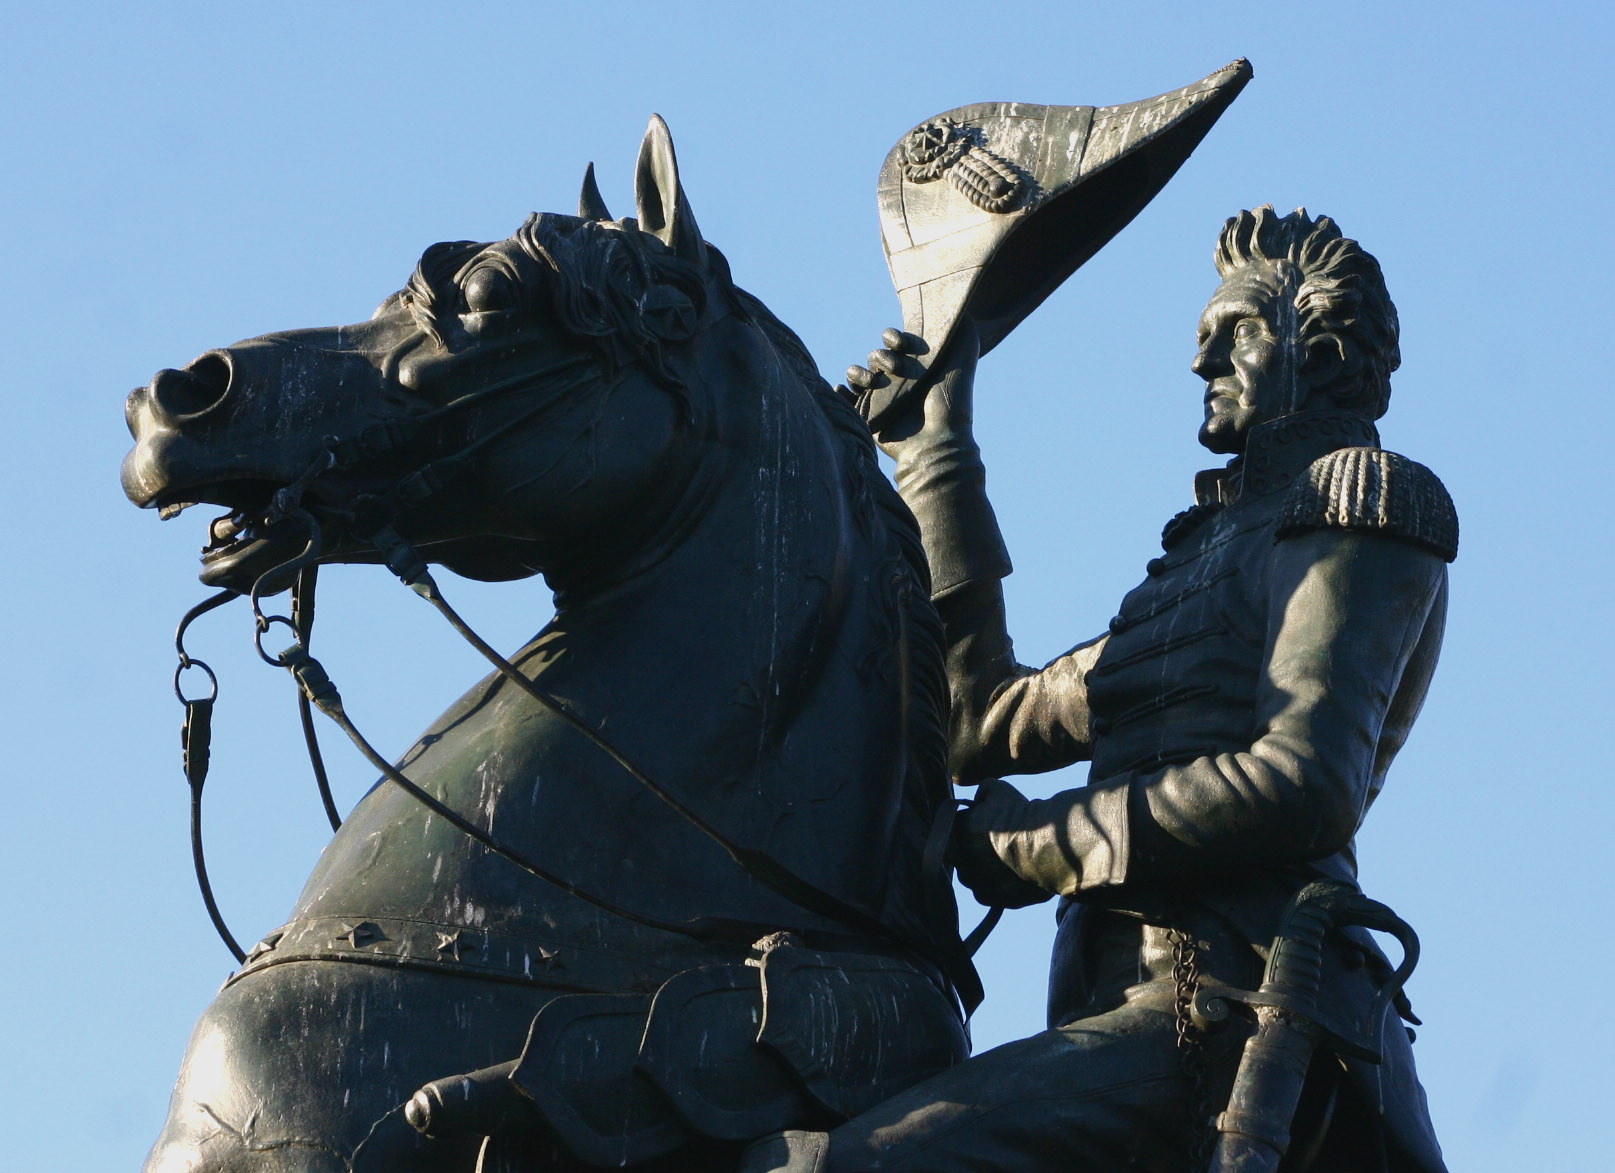 the statue of a man on horseback next to a woman